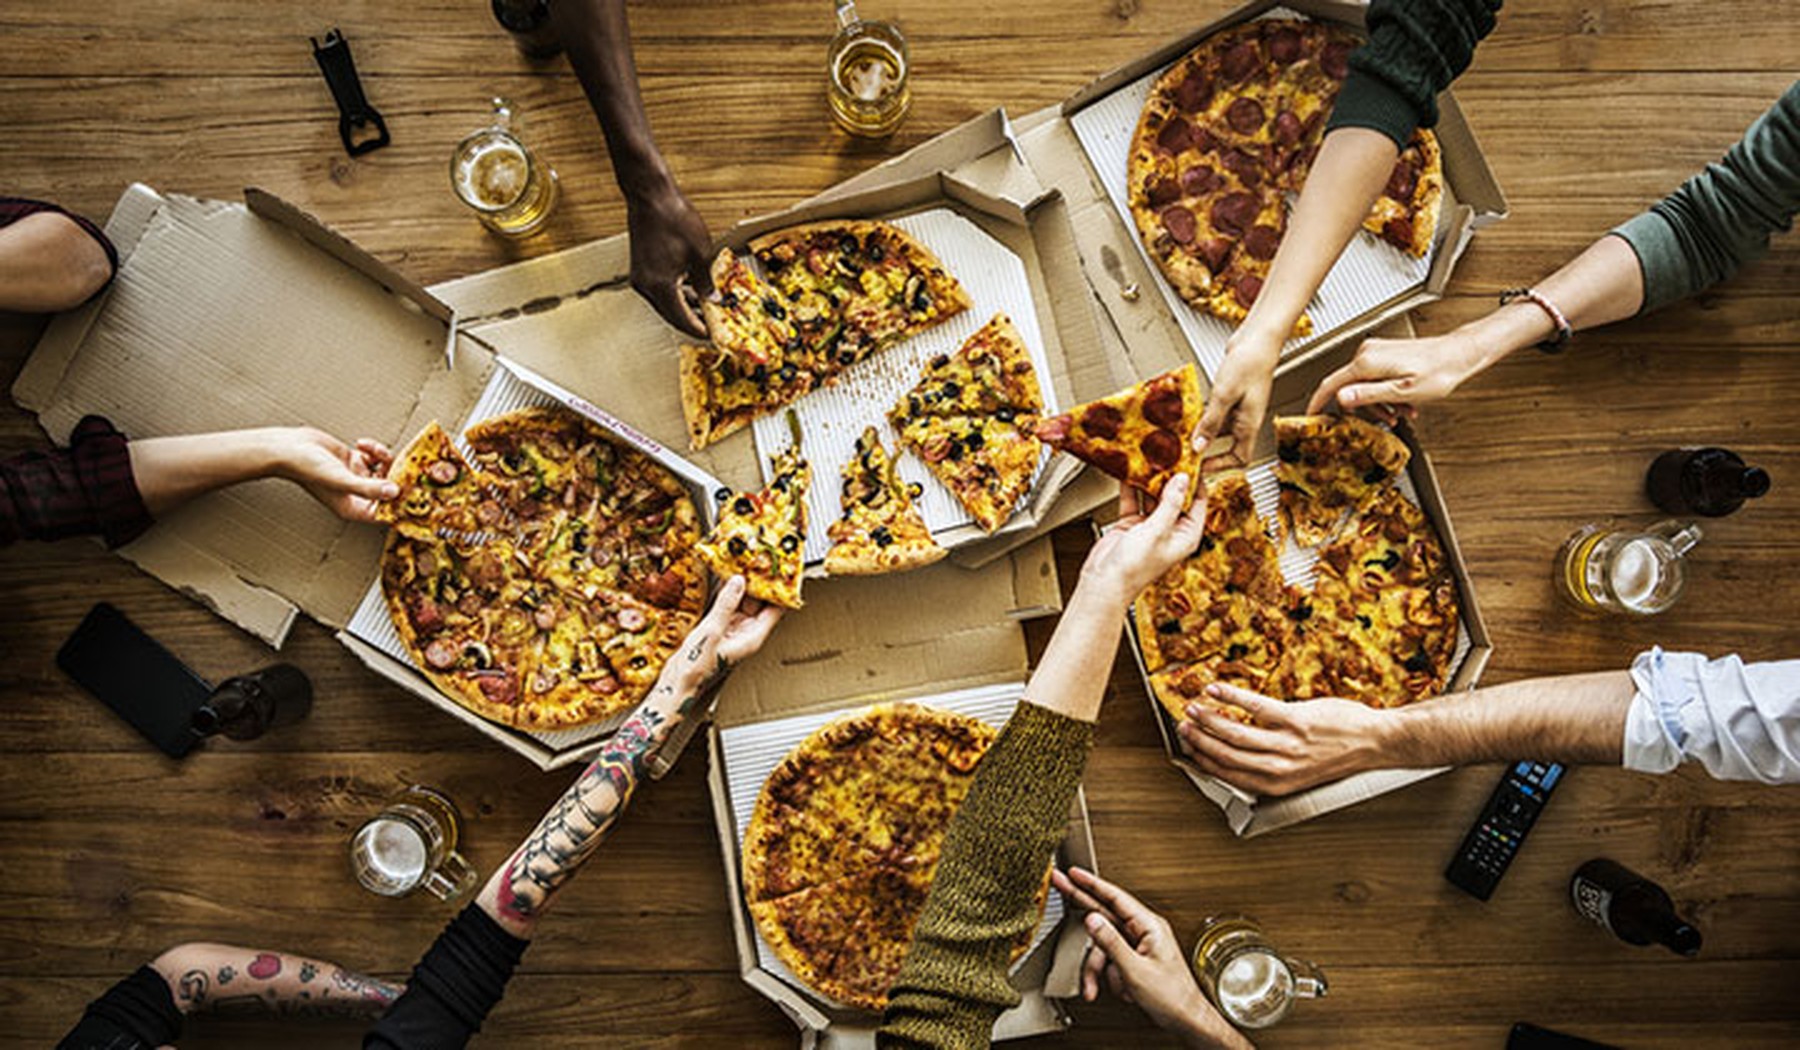 Group of people reaching for pizza out of many boxes